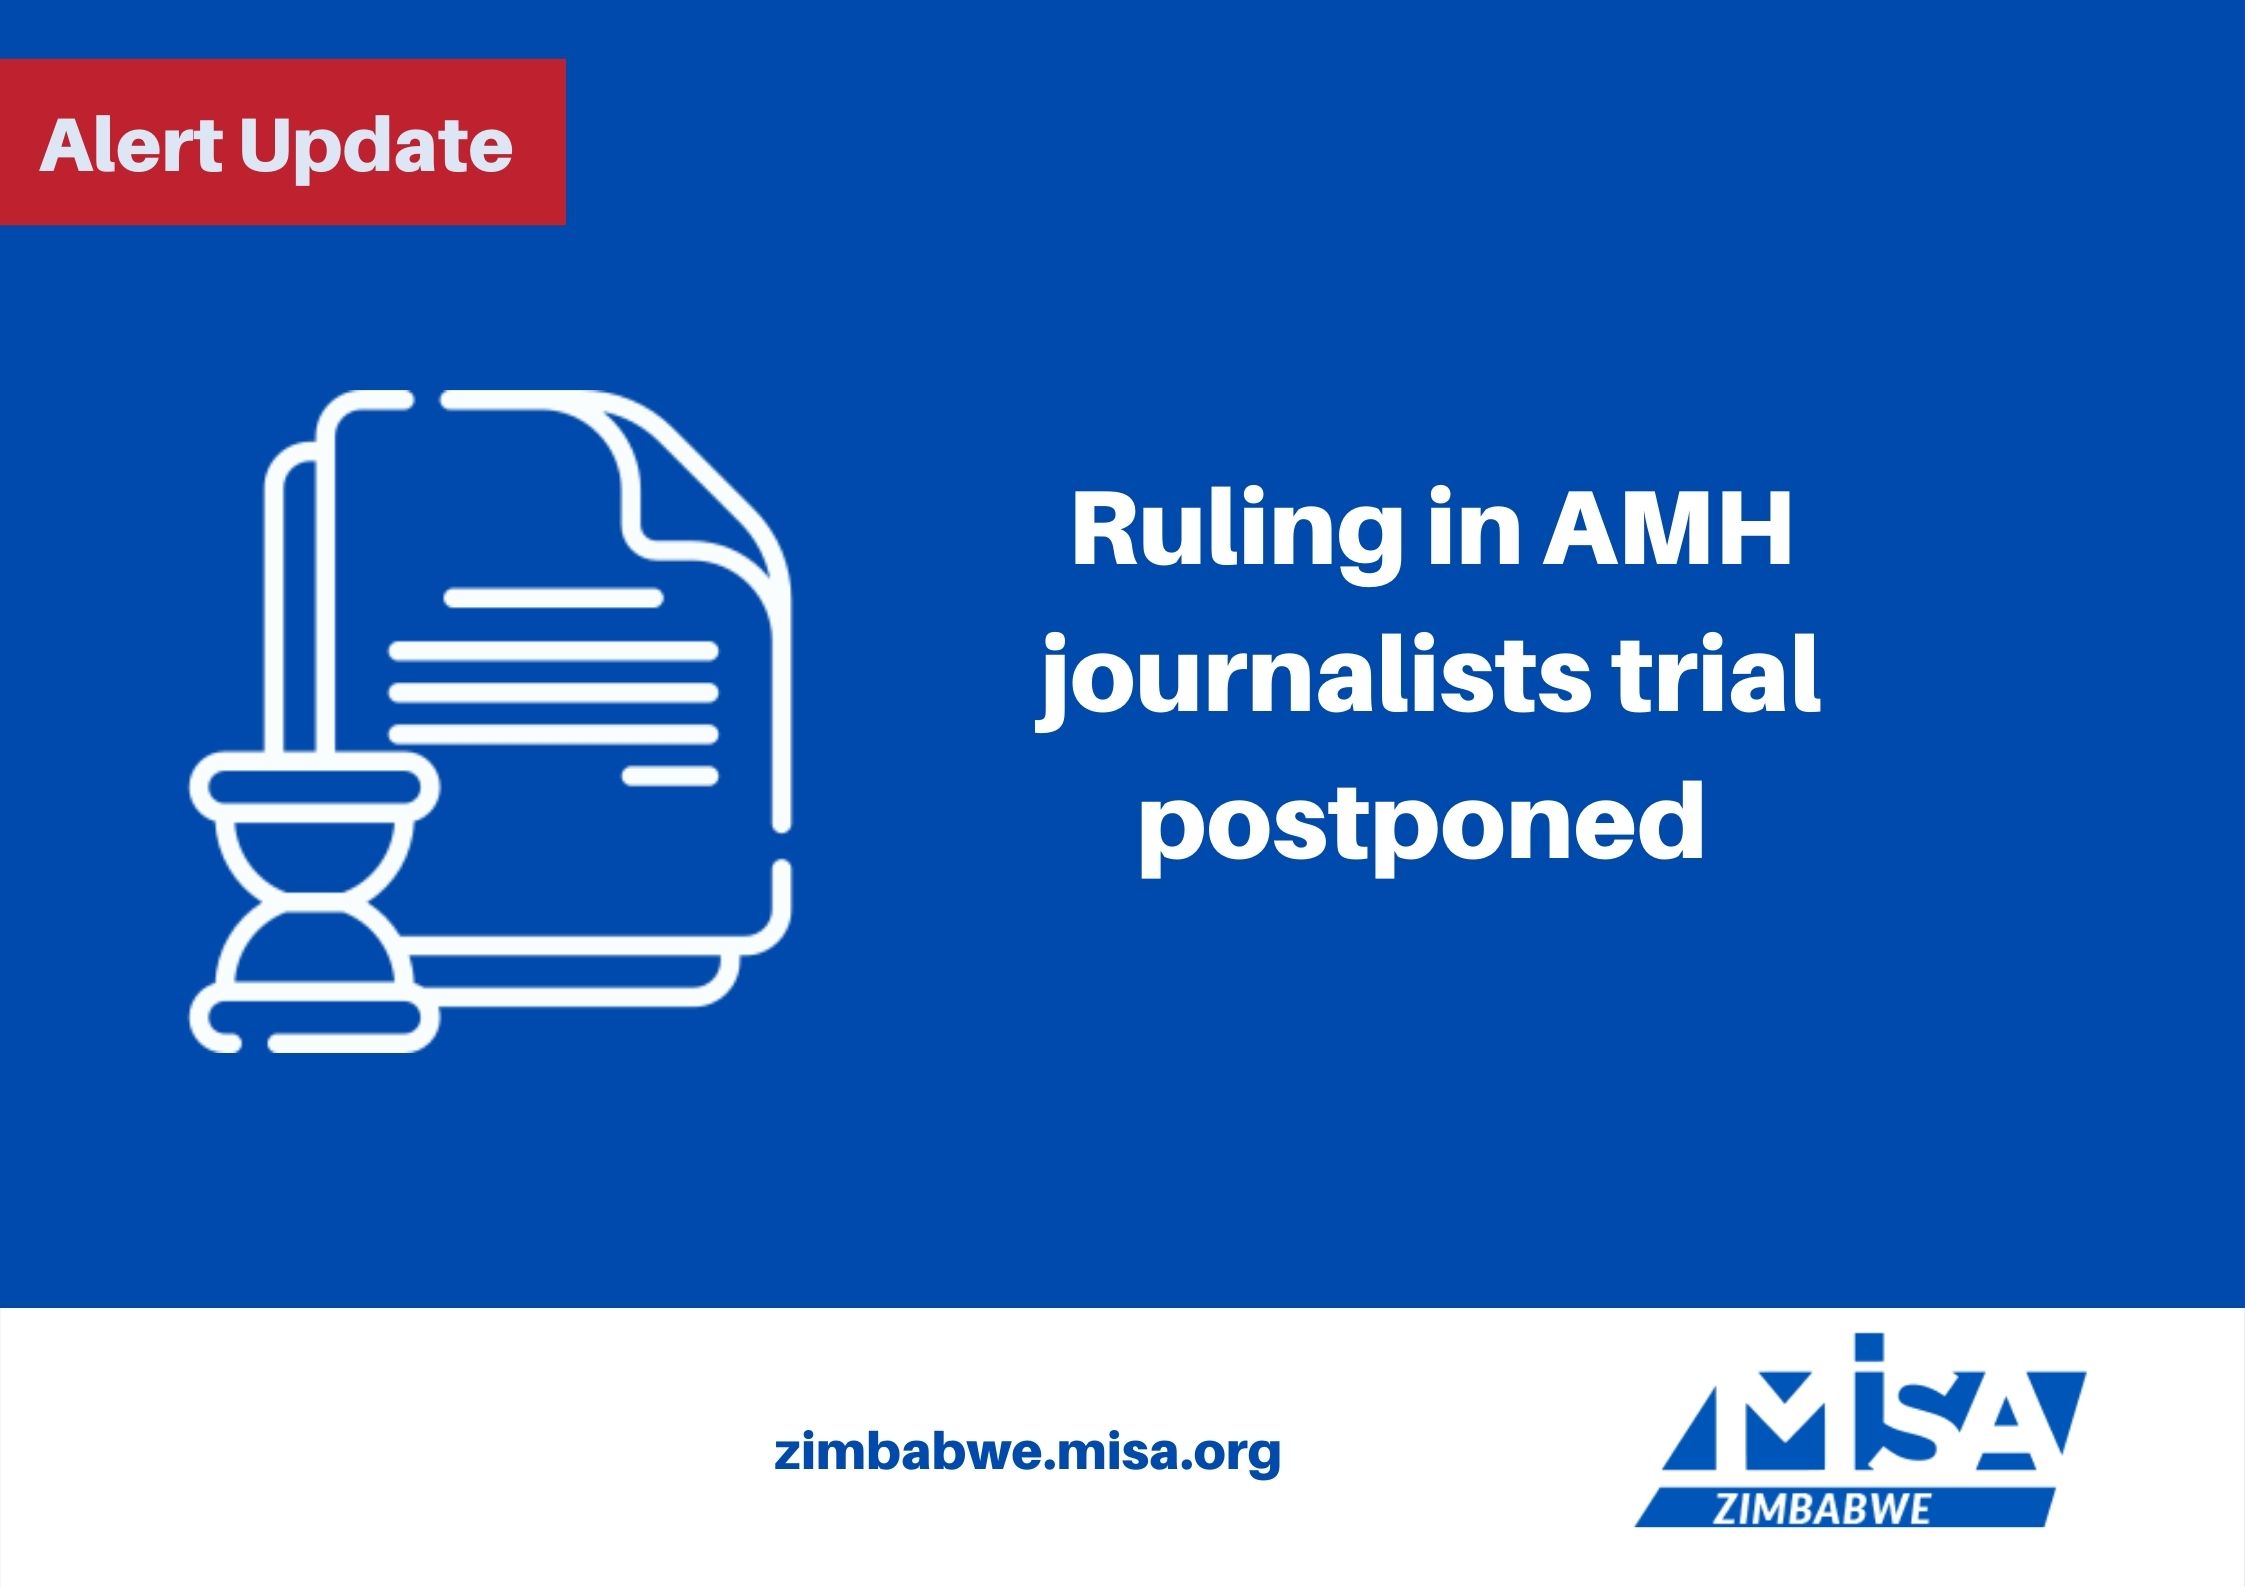 Ruling in AMH journalists trial postponed